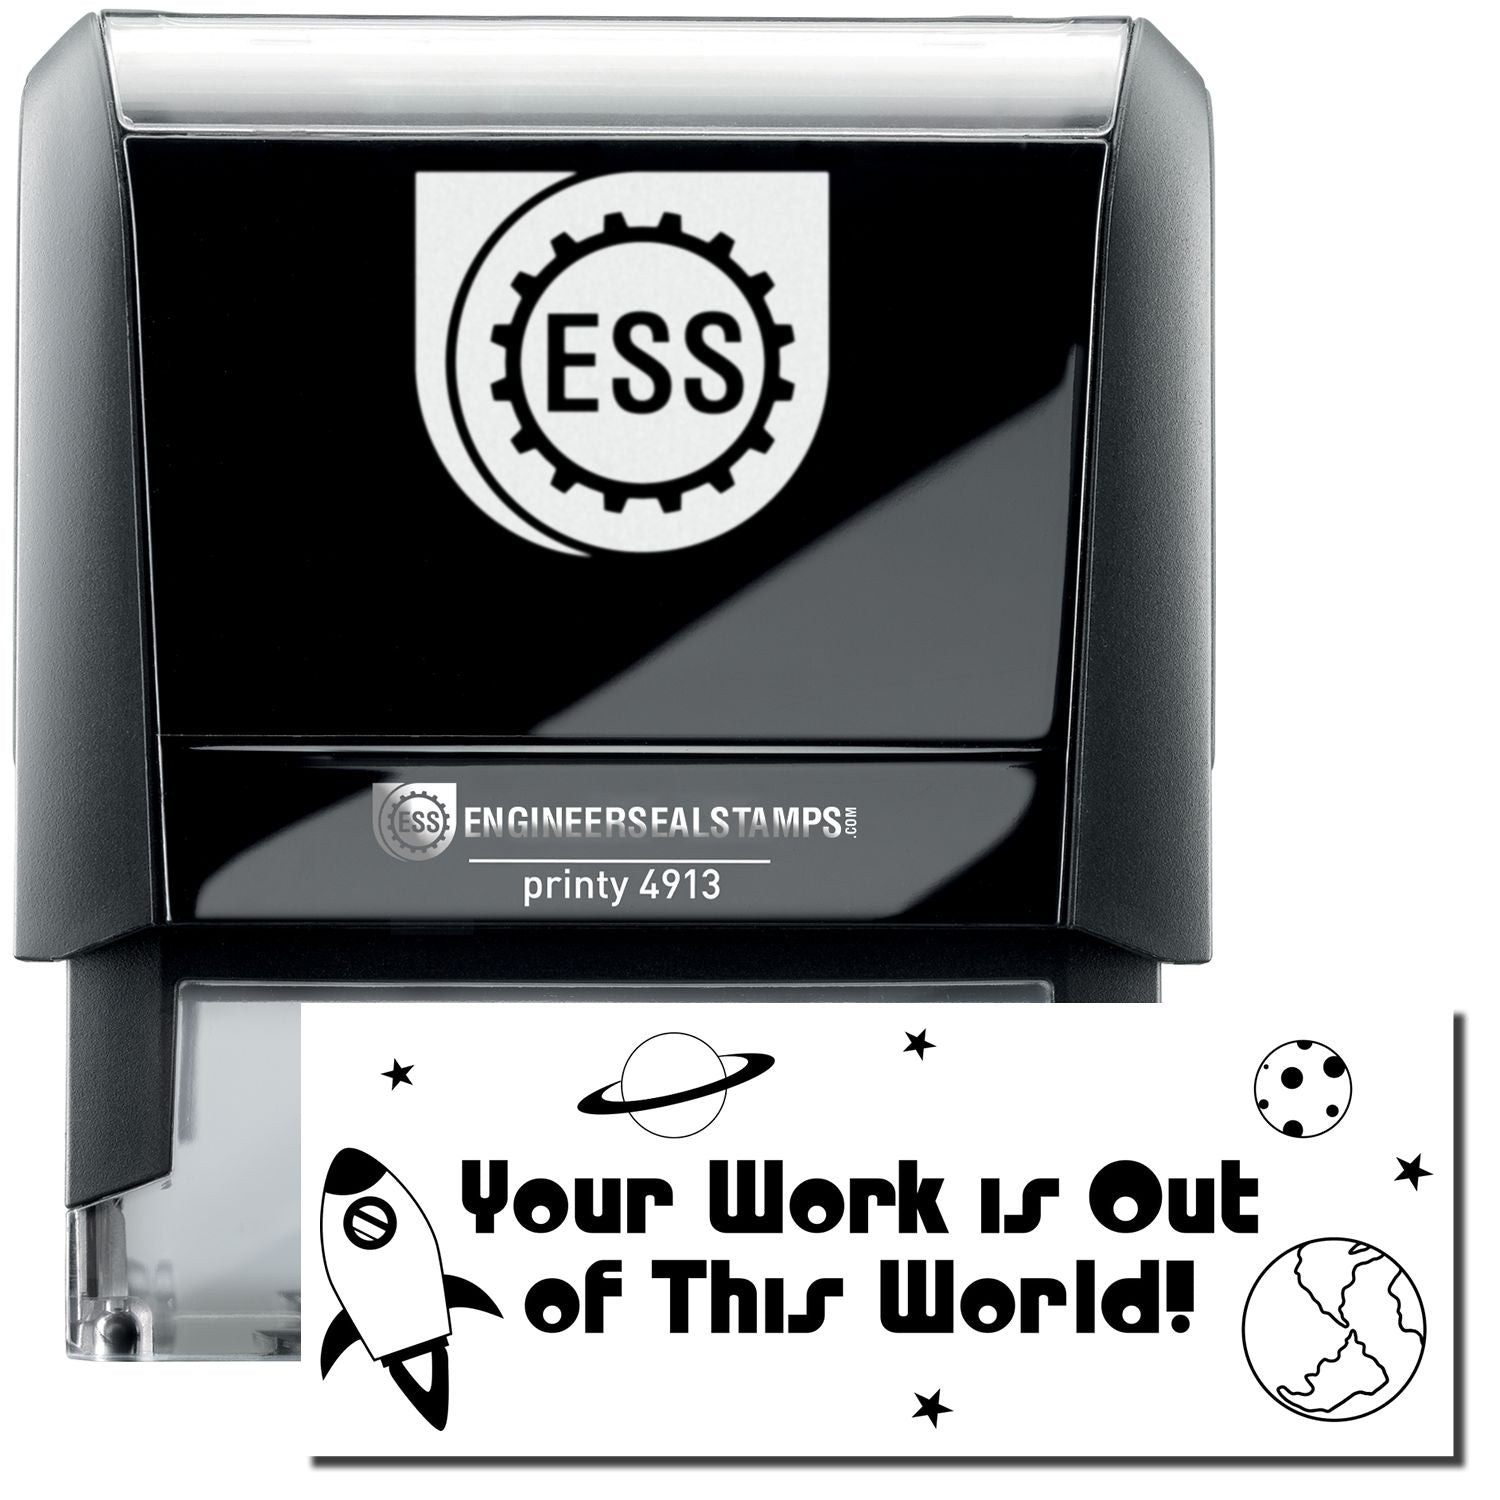 A self-inking stamp with a stamped image showing how the text "Your Work is Out of This World!" in a large unique wacky font surrounded by space icons like planets, moons, and a rocket ship is displayed after stamping.